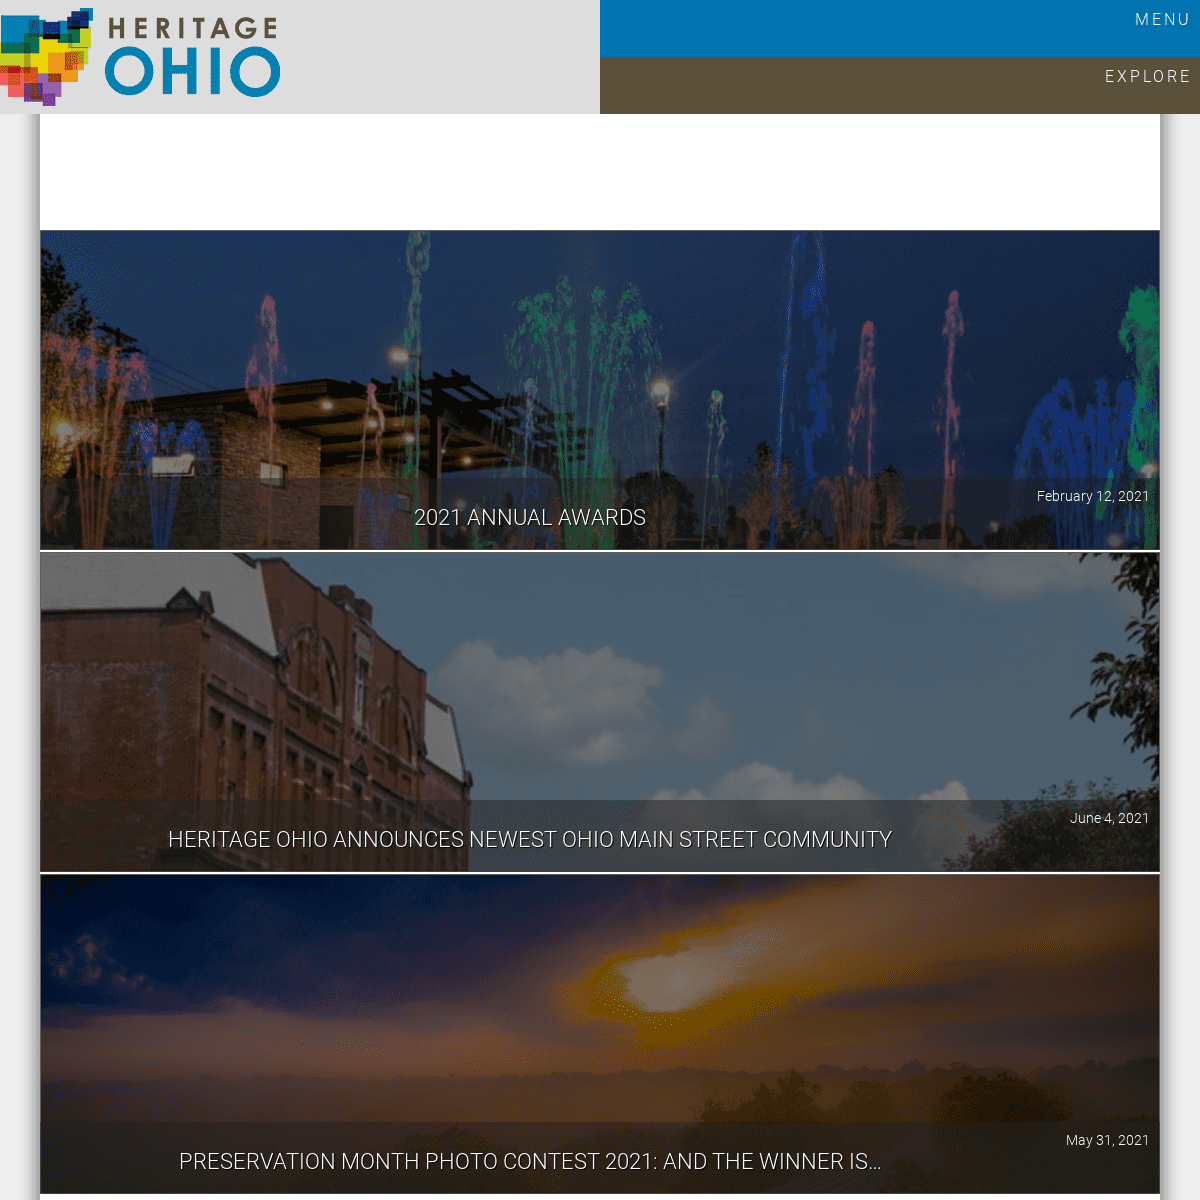 A complete backup of https://heritageohio.org